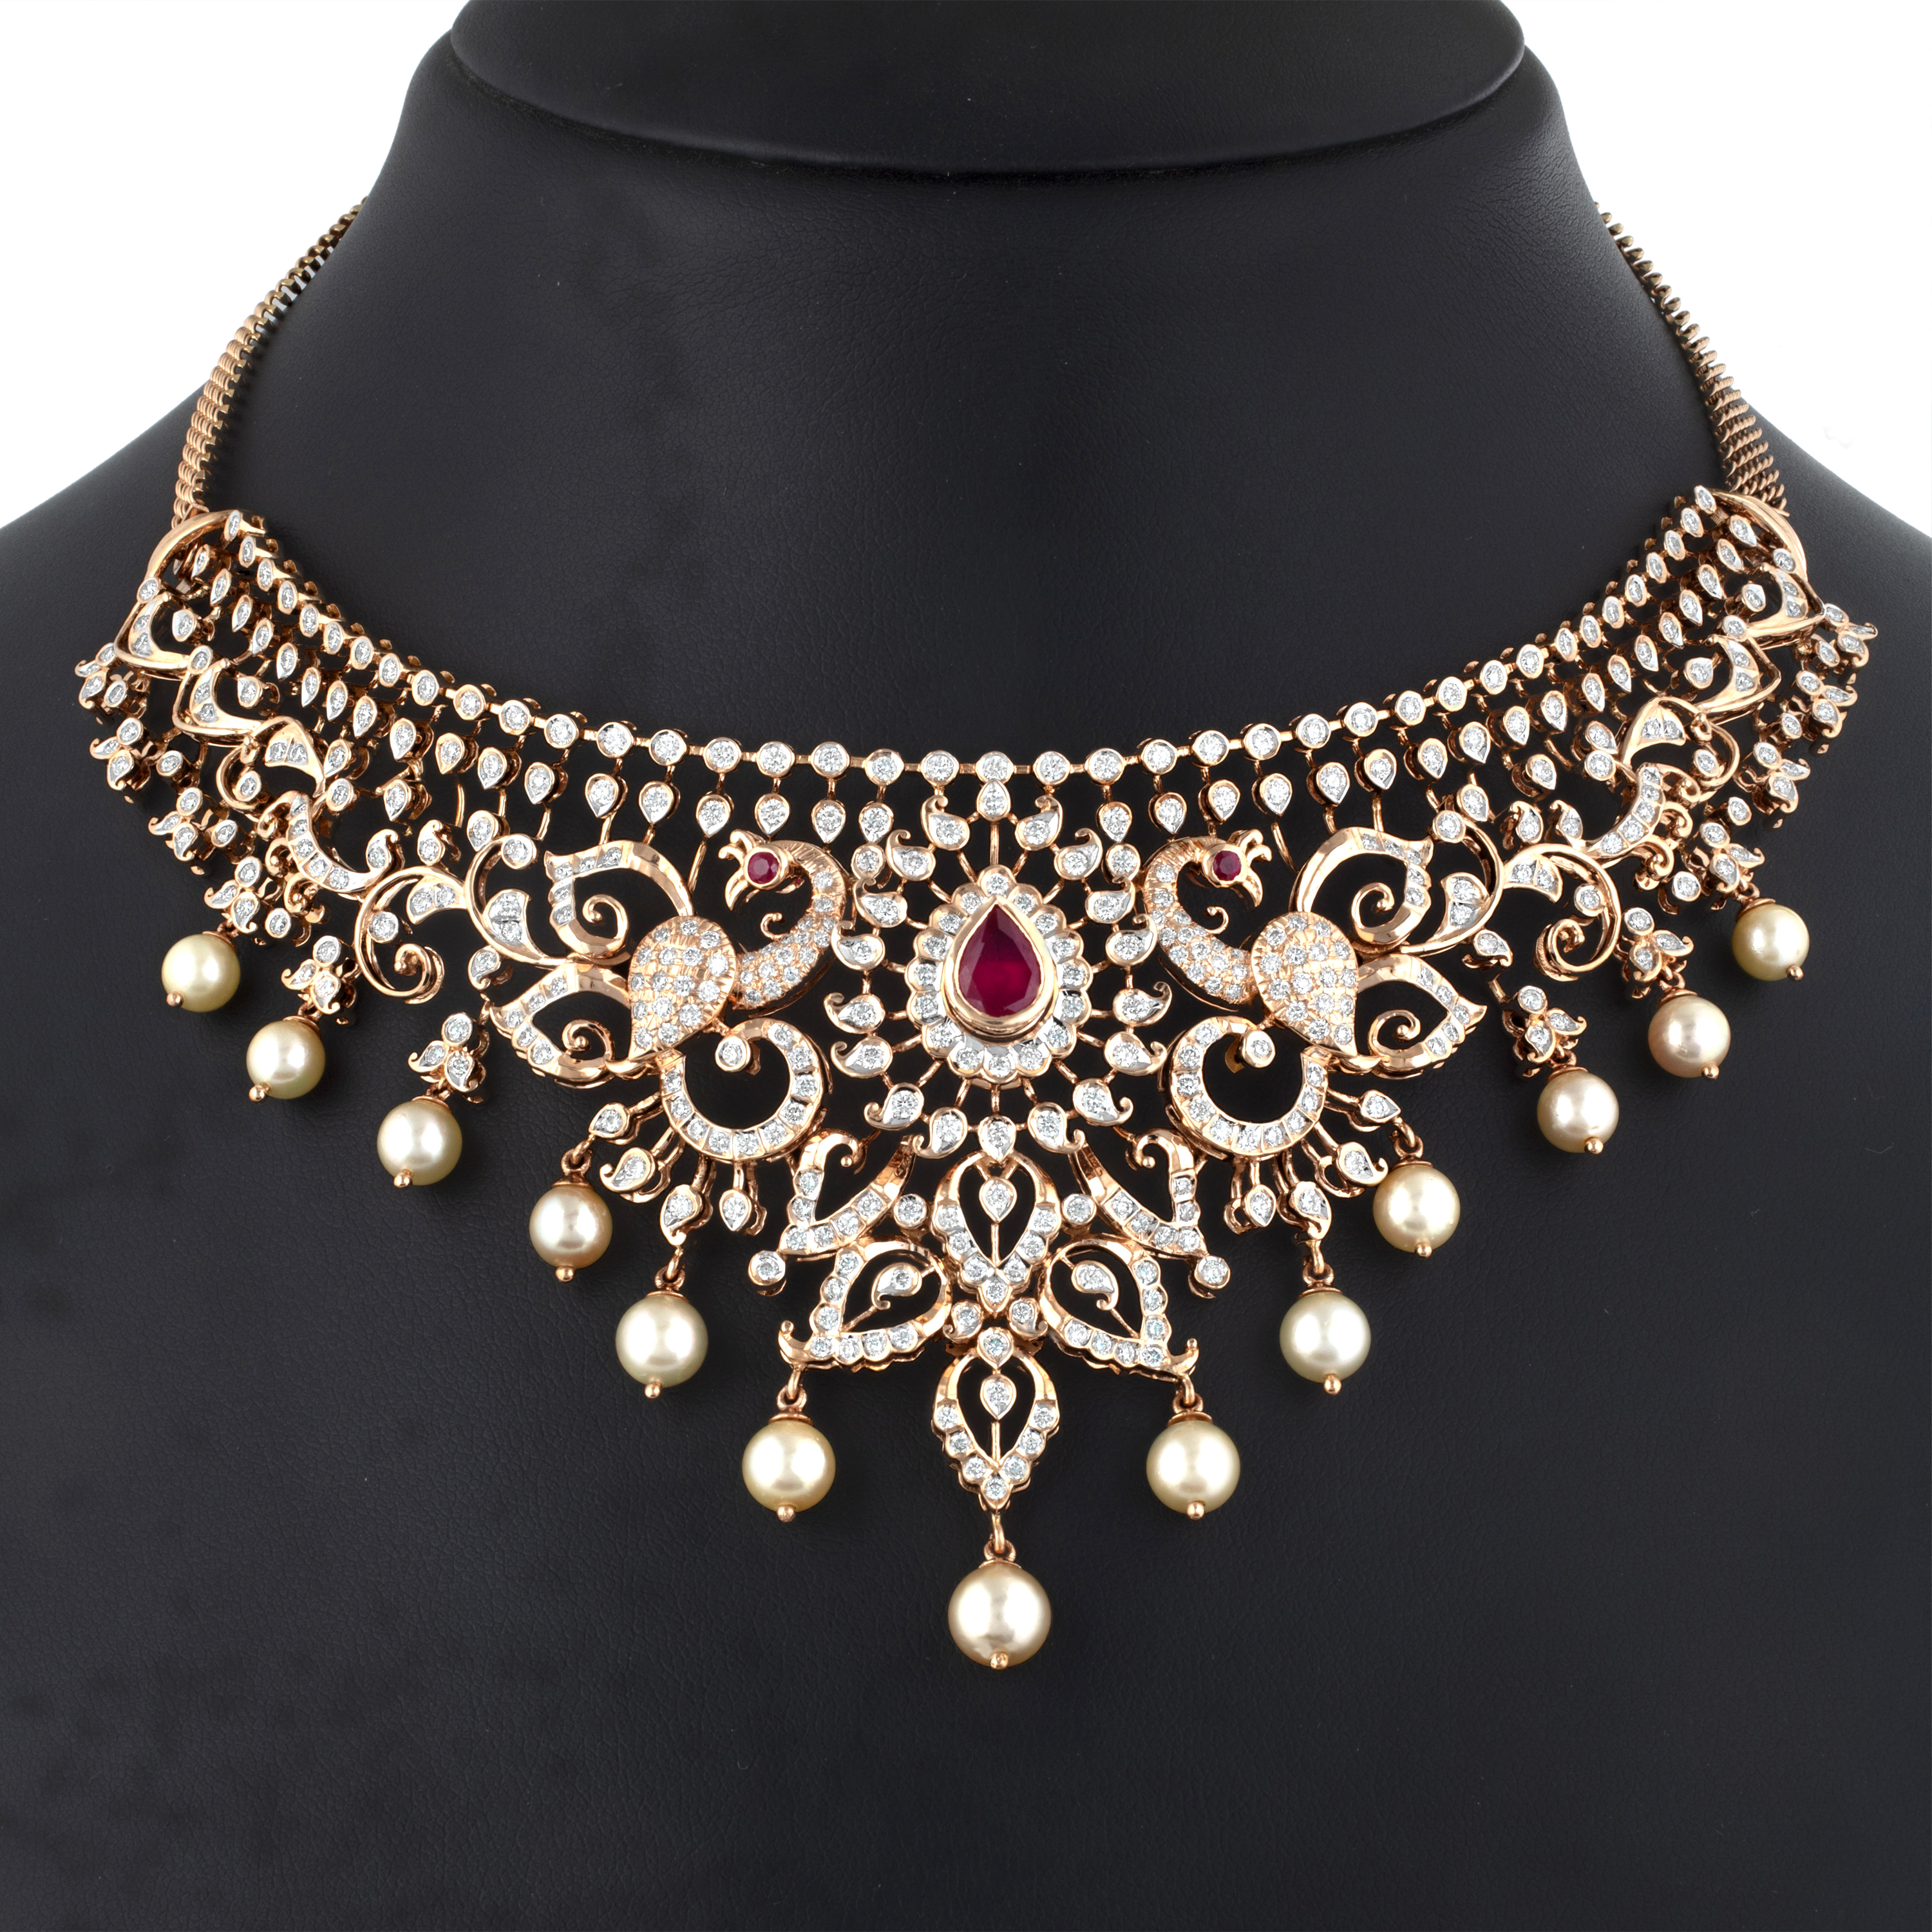 235-DN651 - 18K Gold '2 In 1' Diamond Choker Necklace With Color Stones &  South Sea Pearls | Choker necklace designs, Diamond choker necklace, Diamond  choker